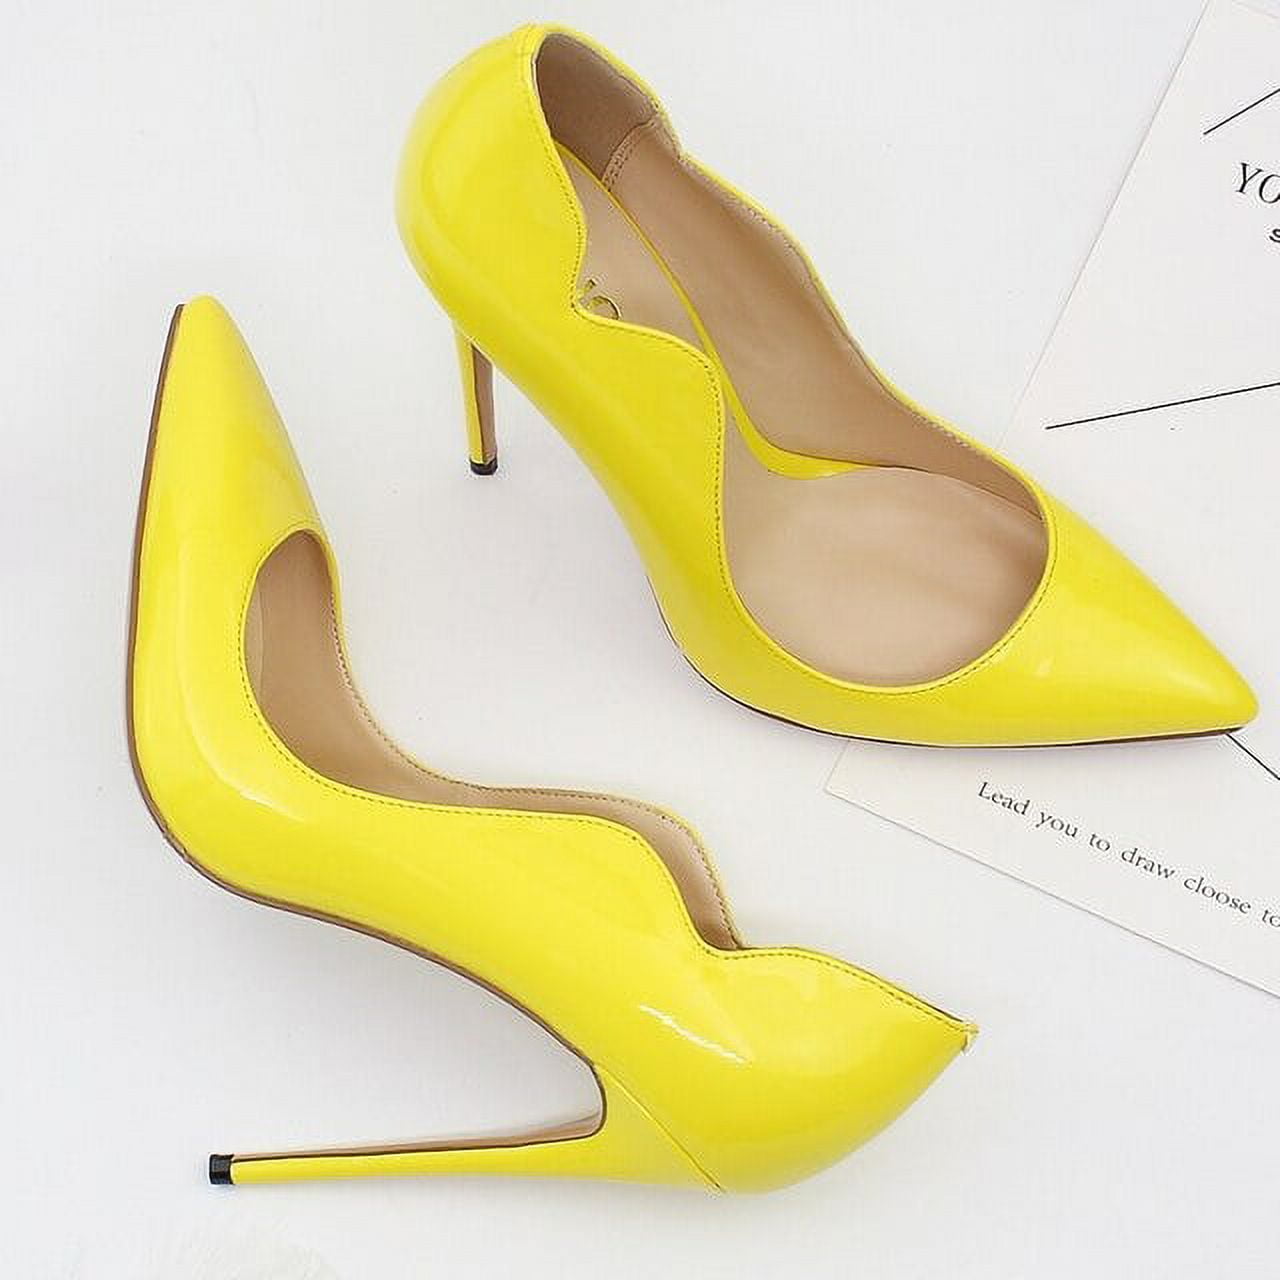 Fantasy Butterfly Stiletto Heels Celebrity Style Black And Yellow Ankle  Strap Pointed Butterfly Strap Heels Pumps In 11.5CM Sizes 35 41 From  Tradingbear, $28.26 | DHgate.Com